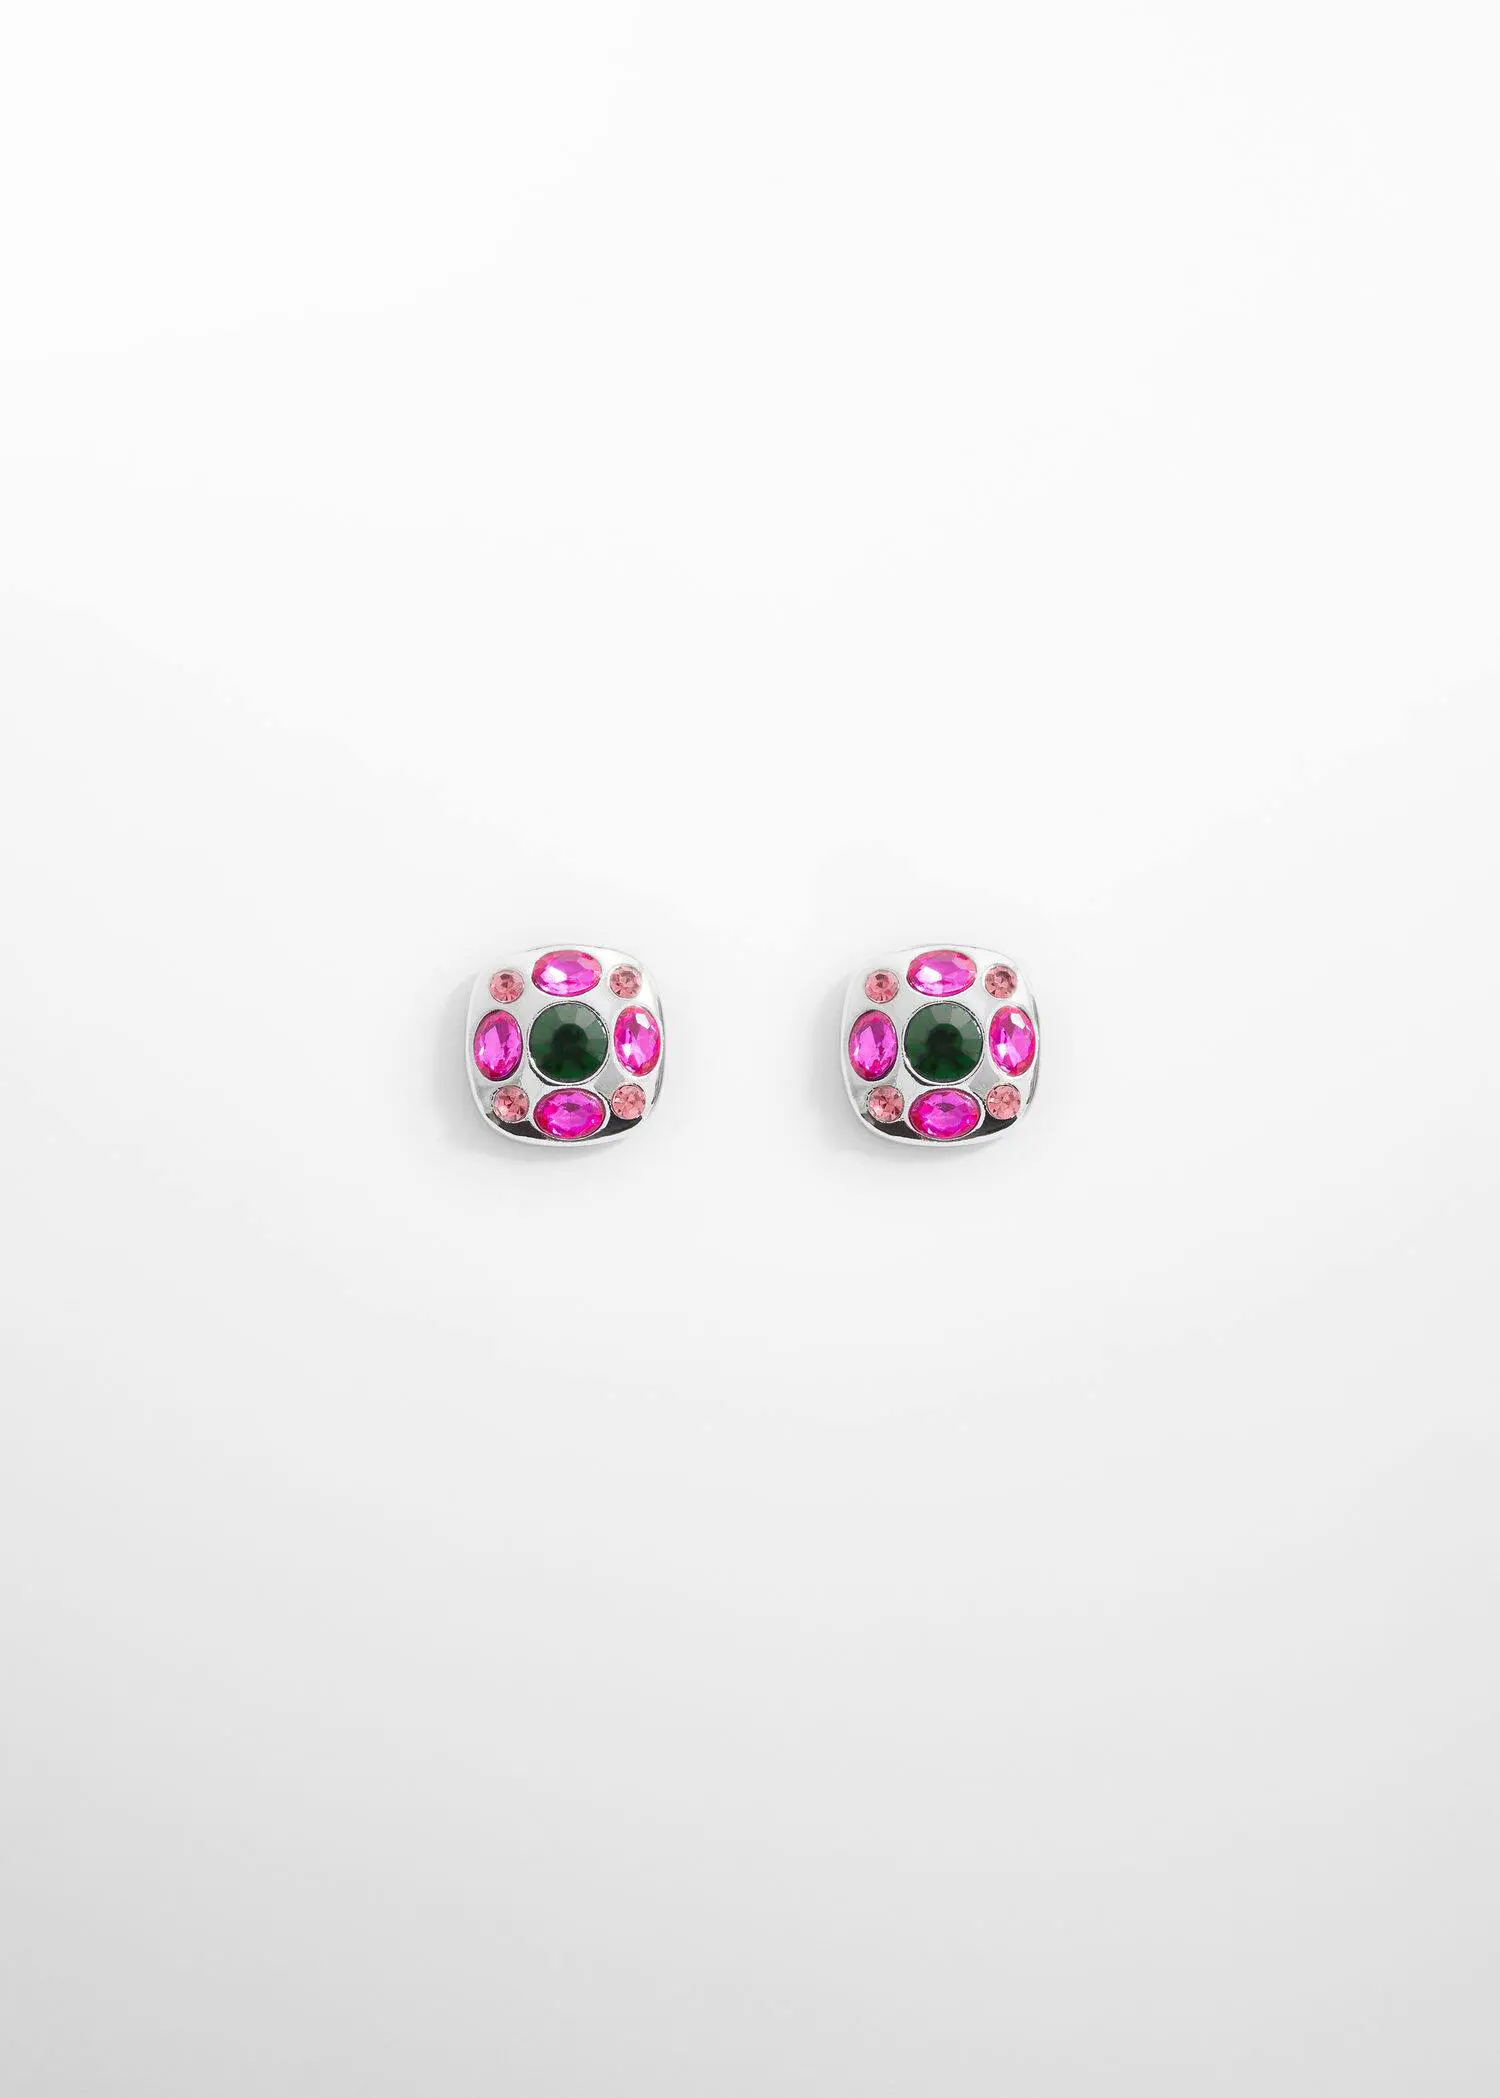 Mango Faceted crystal earring. a pair of pink and purple earrings on a white surface. 